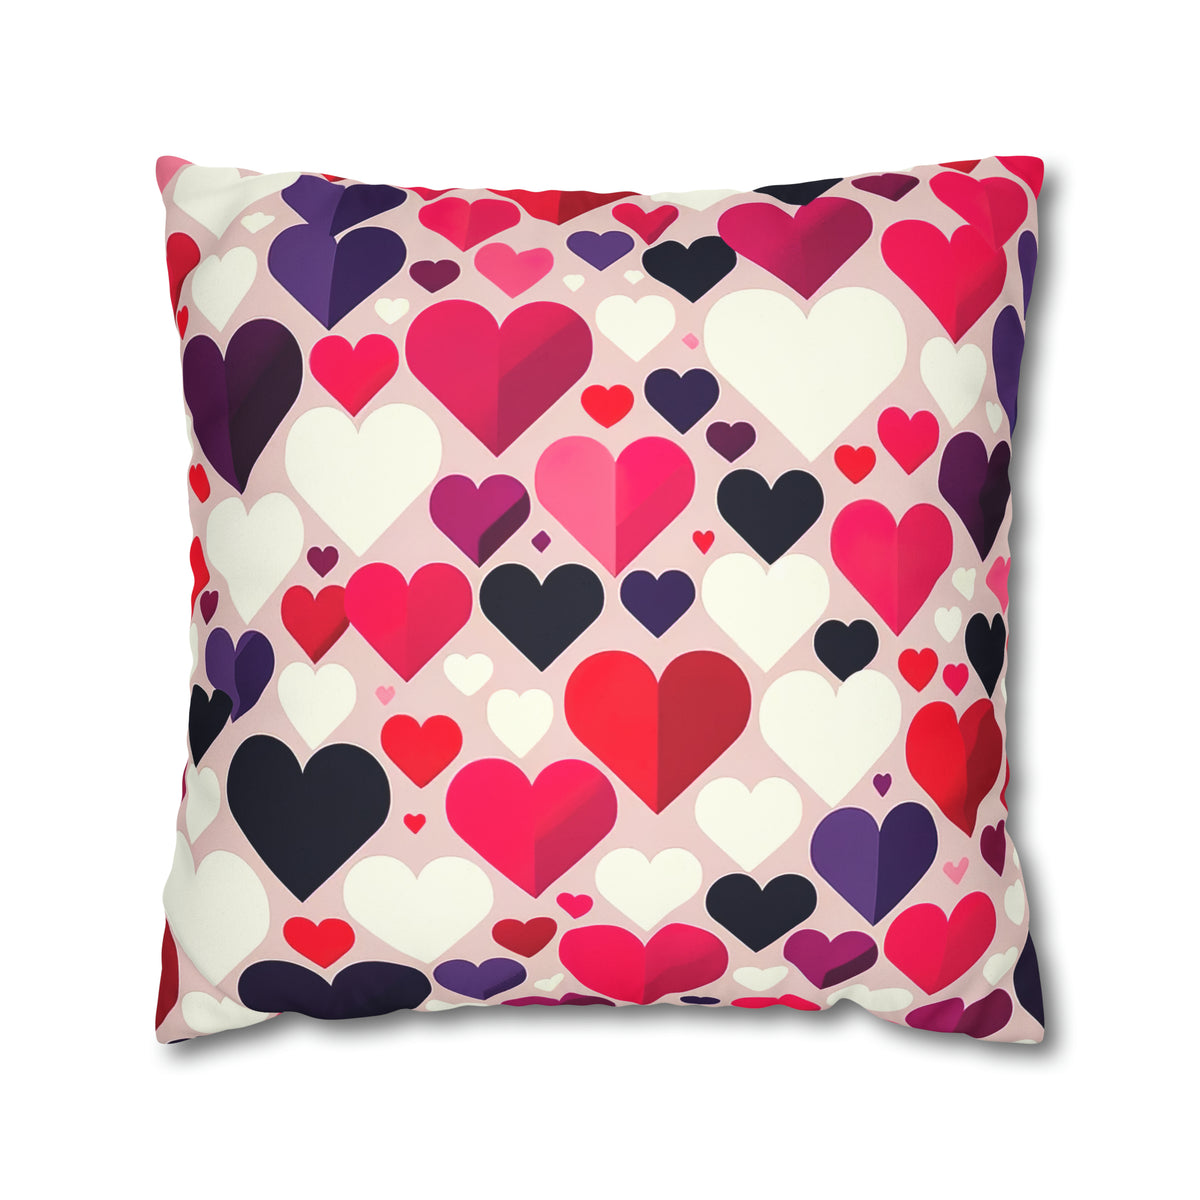 Cute Valentine Throw Pillow Case | Valentine Hearts Pillow Home Decor | Valentine Gift for Her | Faux Suede Decorative Throw Pillow Case